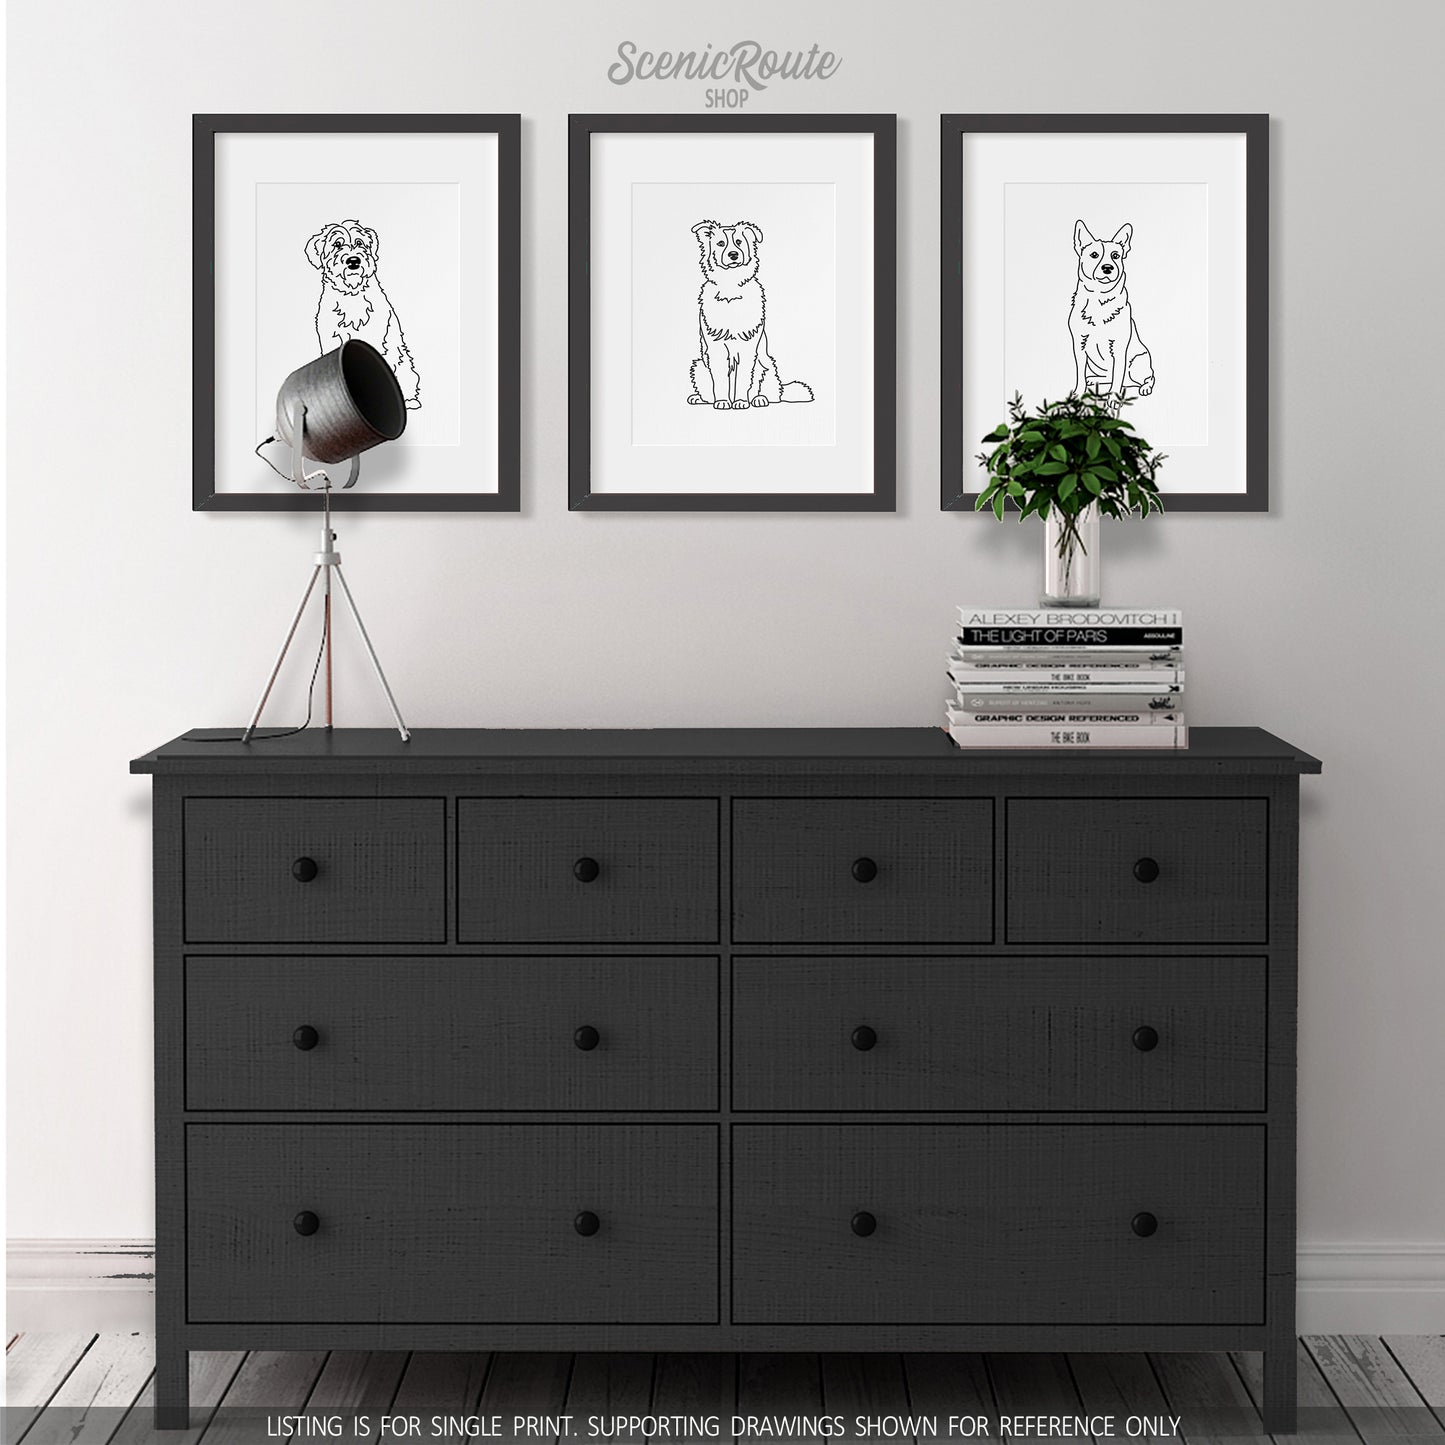 A black dresser with a lamp and a plant on top and three framed art prints hung above. The line art drawings include a Wheaten Terrier dog, Australian Shepherd dog, and Australian Cattle Dog